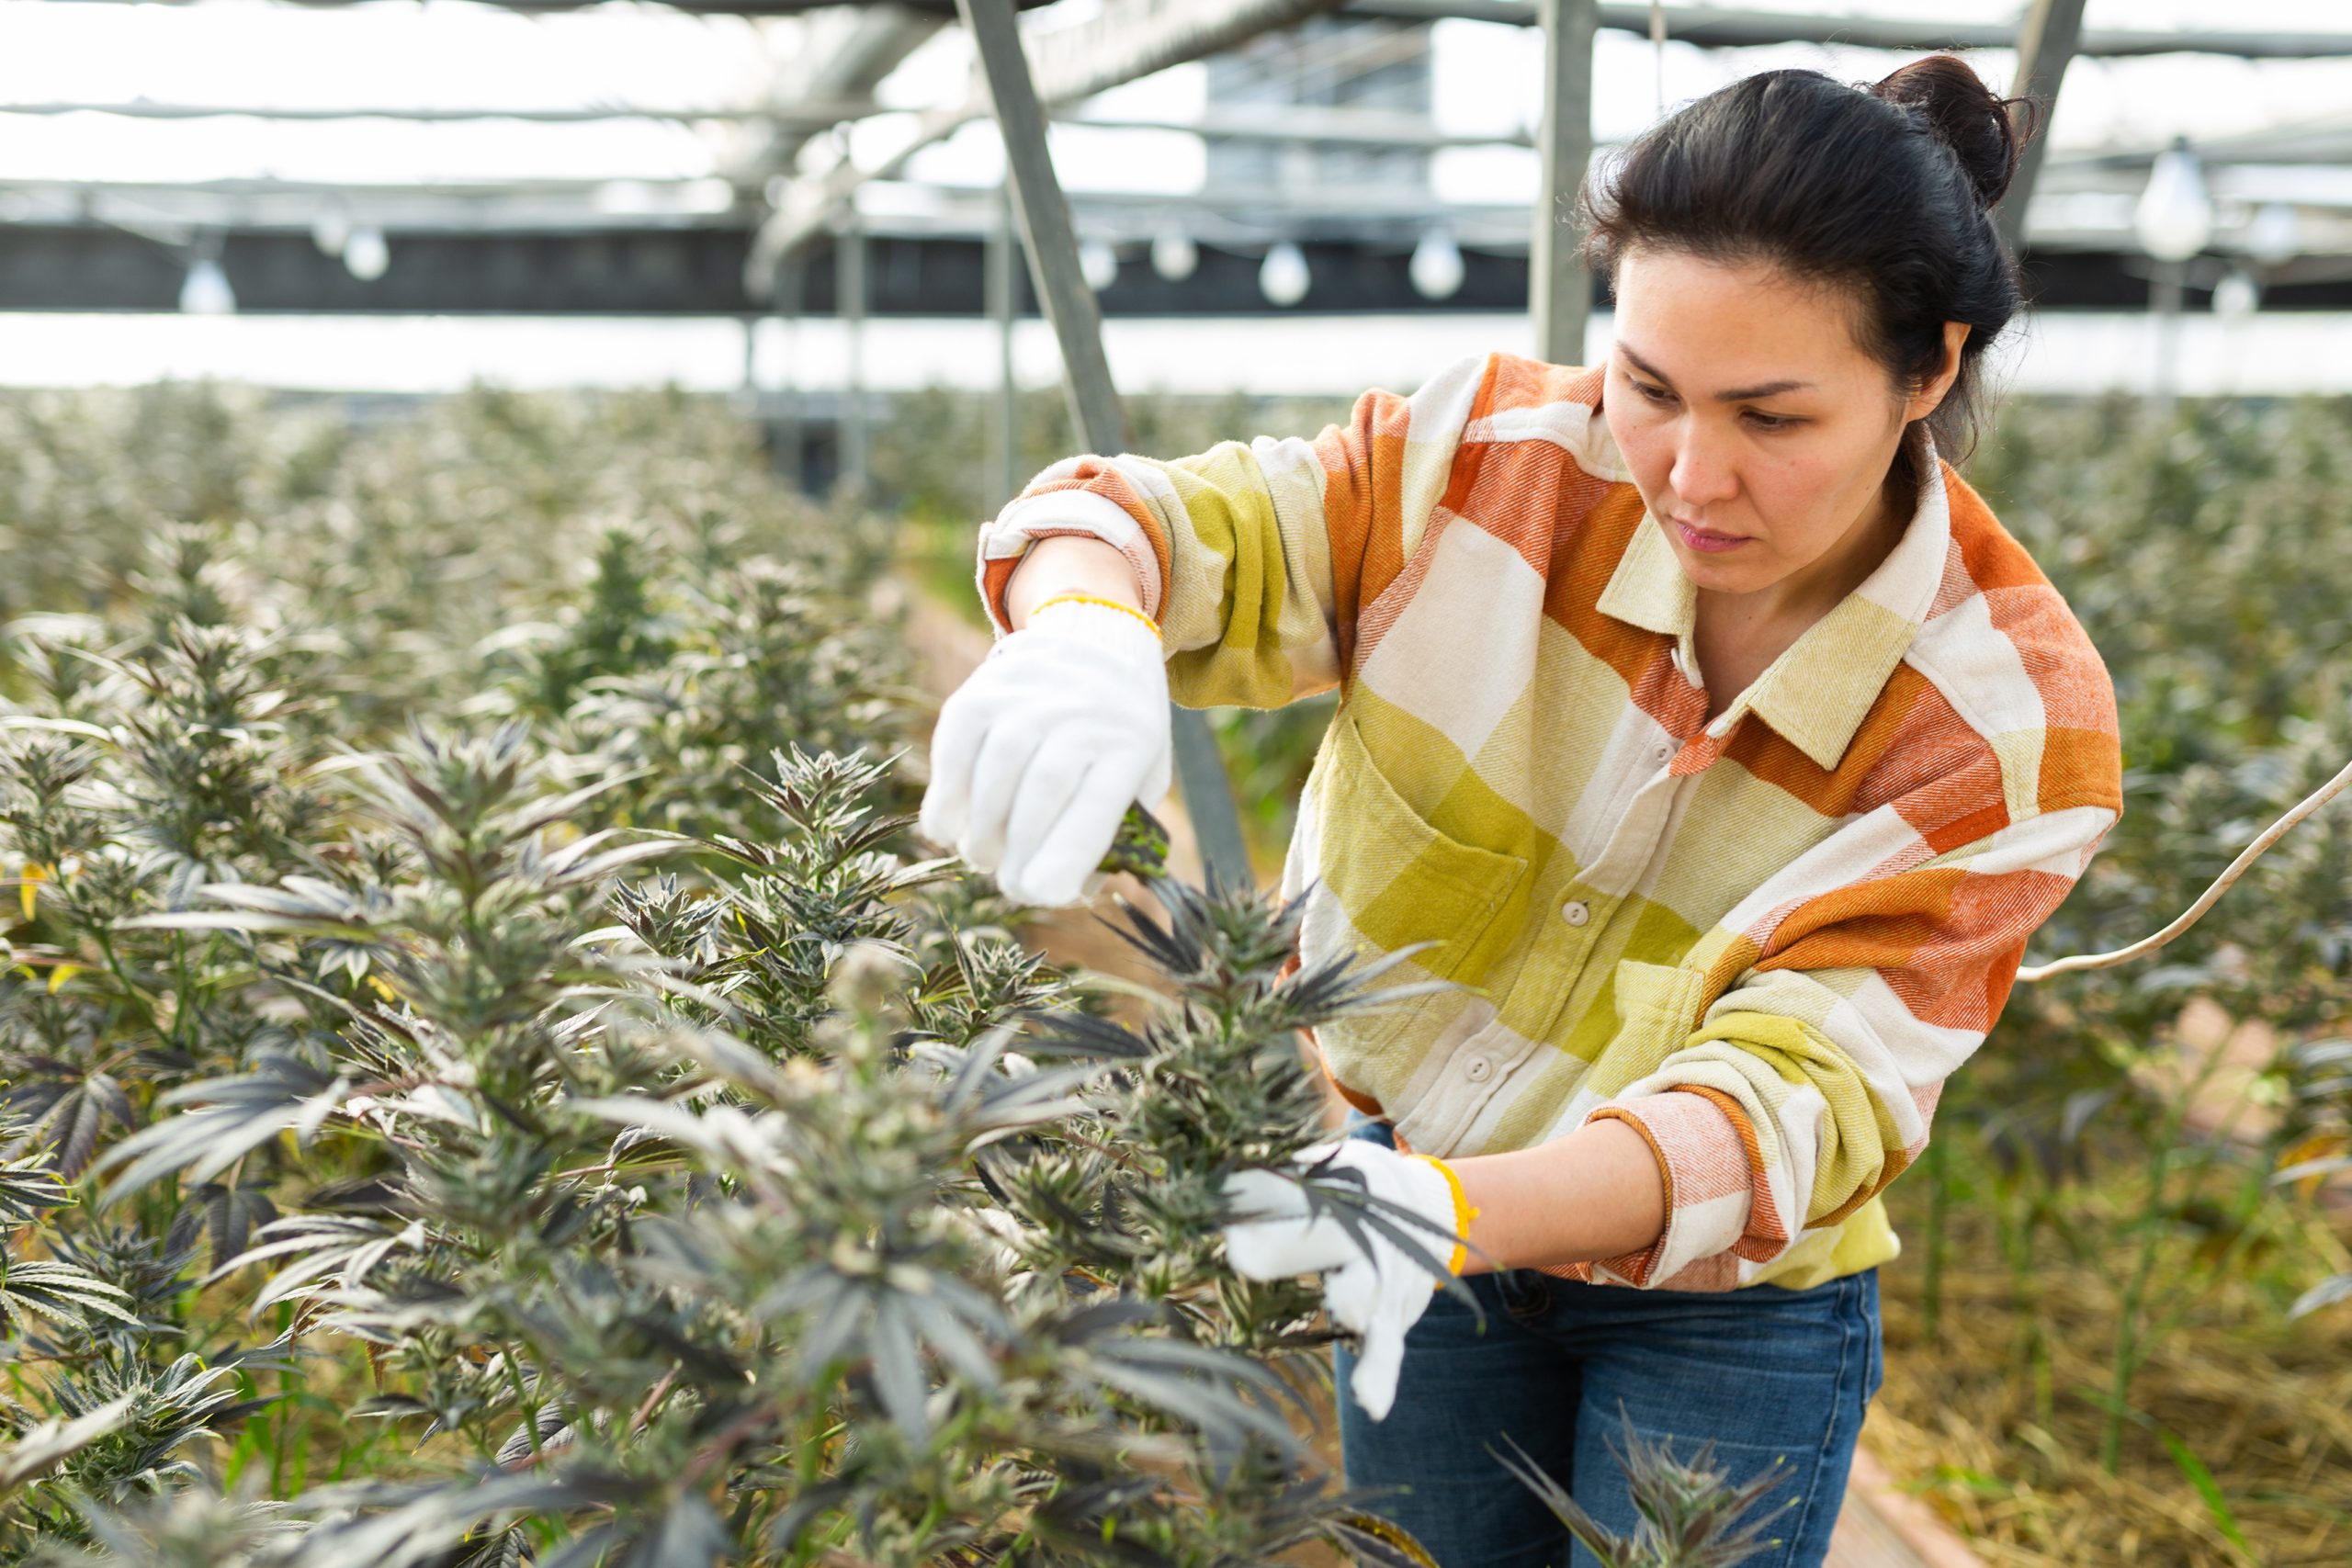 Hardworking asian woman farmer working in a greenhouse cropping cannabis with pruner